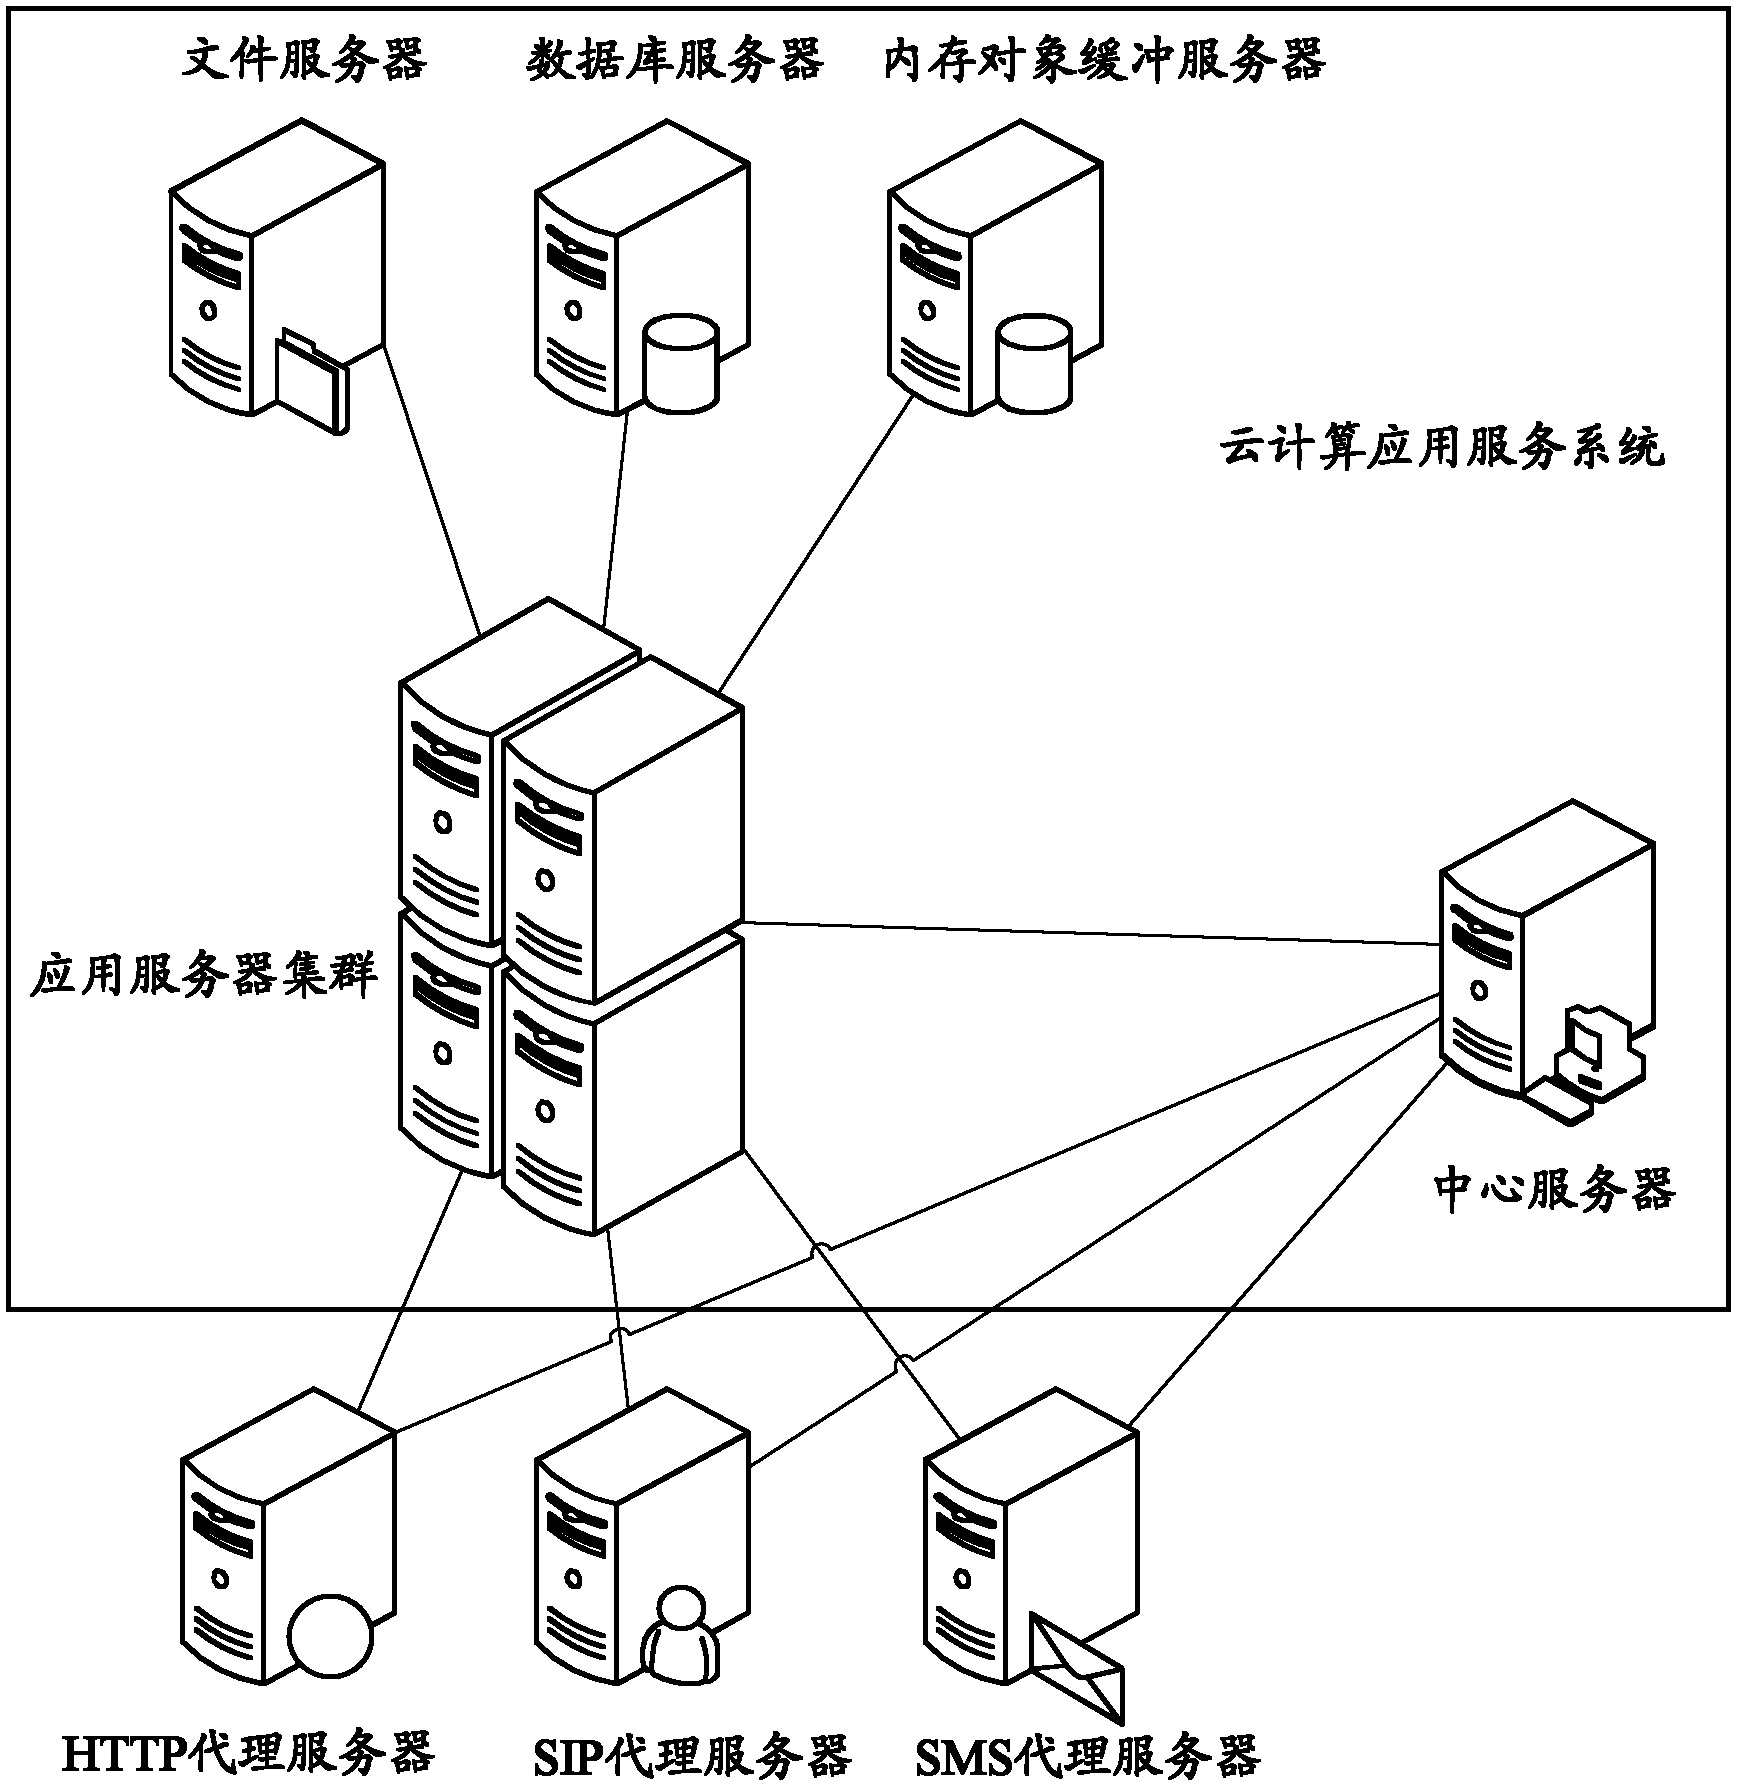 Application access method in a plurality of application service platform systems